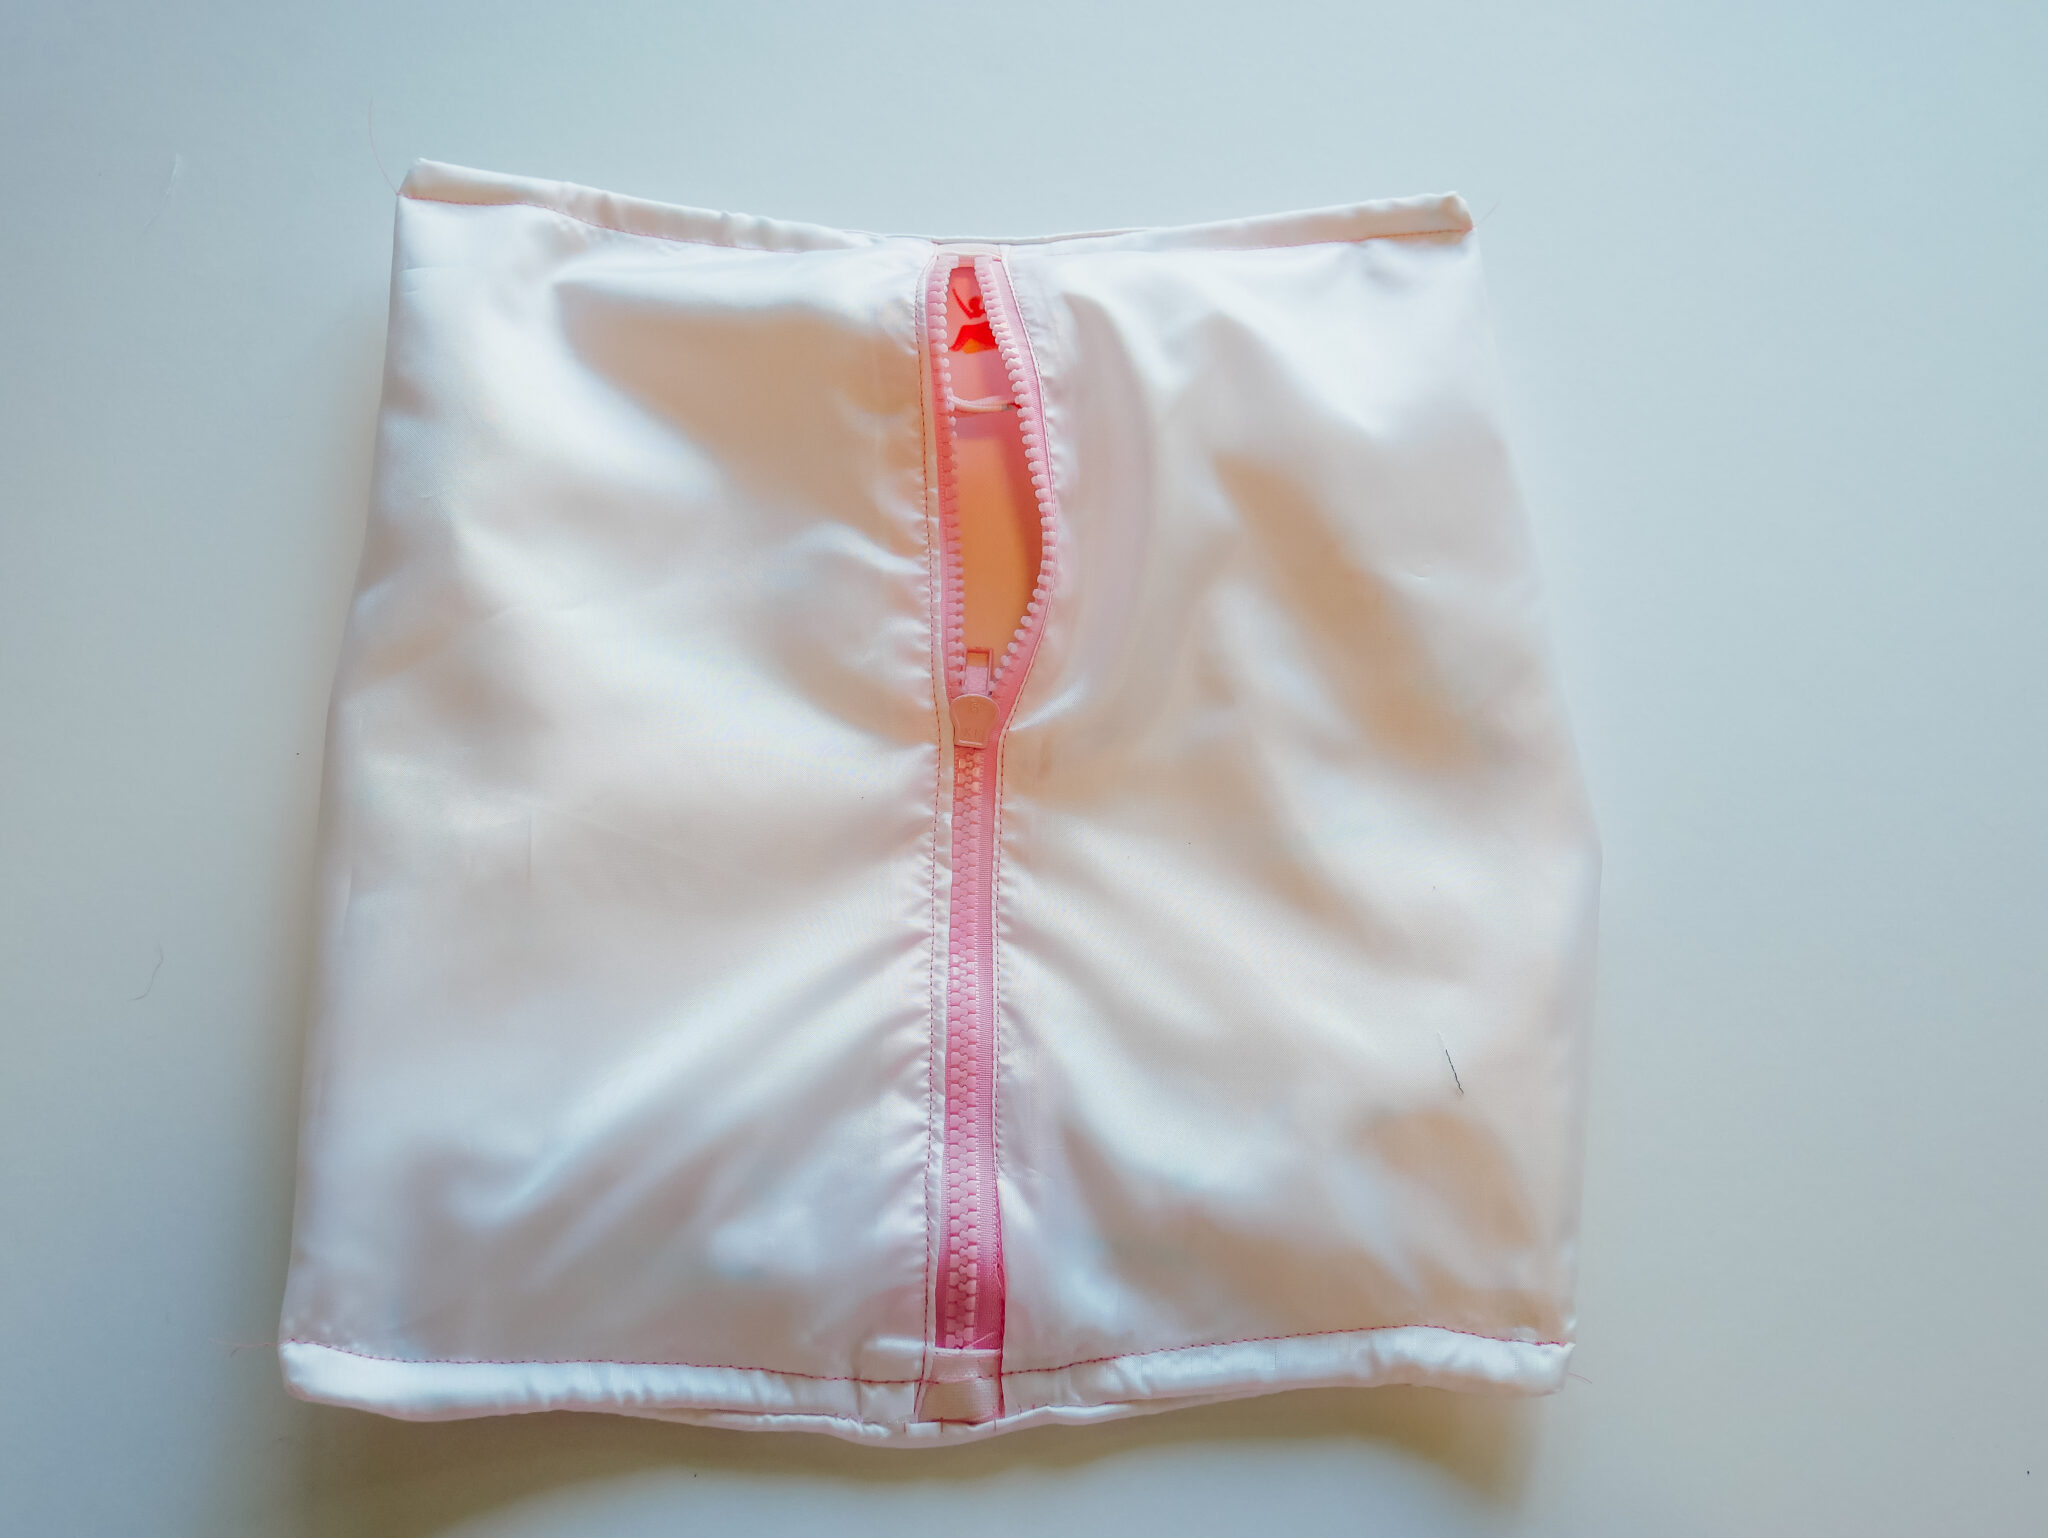 A rectangle-shaped bag has been turned inside out, the Polyurethane Laminate fabric is showing as is the back side of a pink zipper. The bag is laying on a white surface.